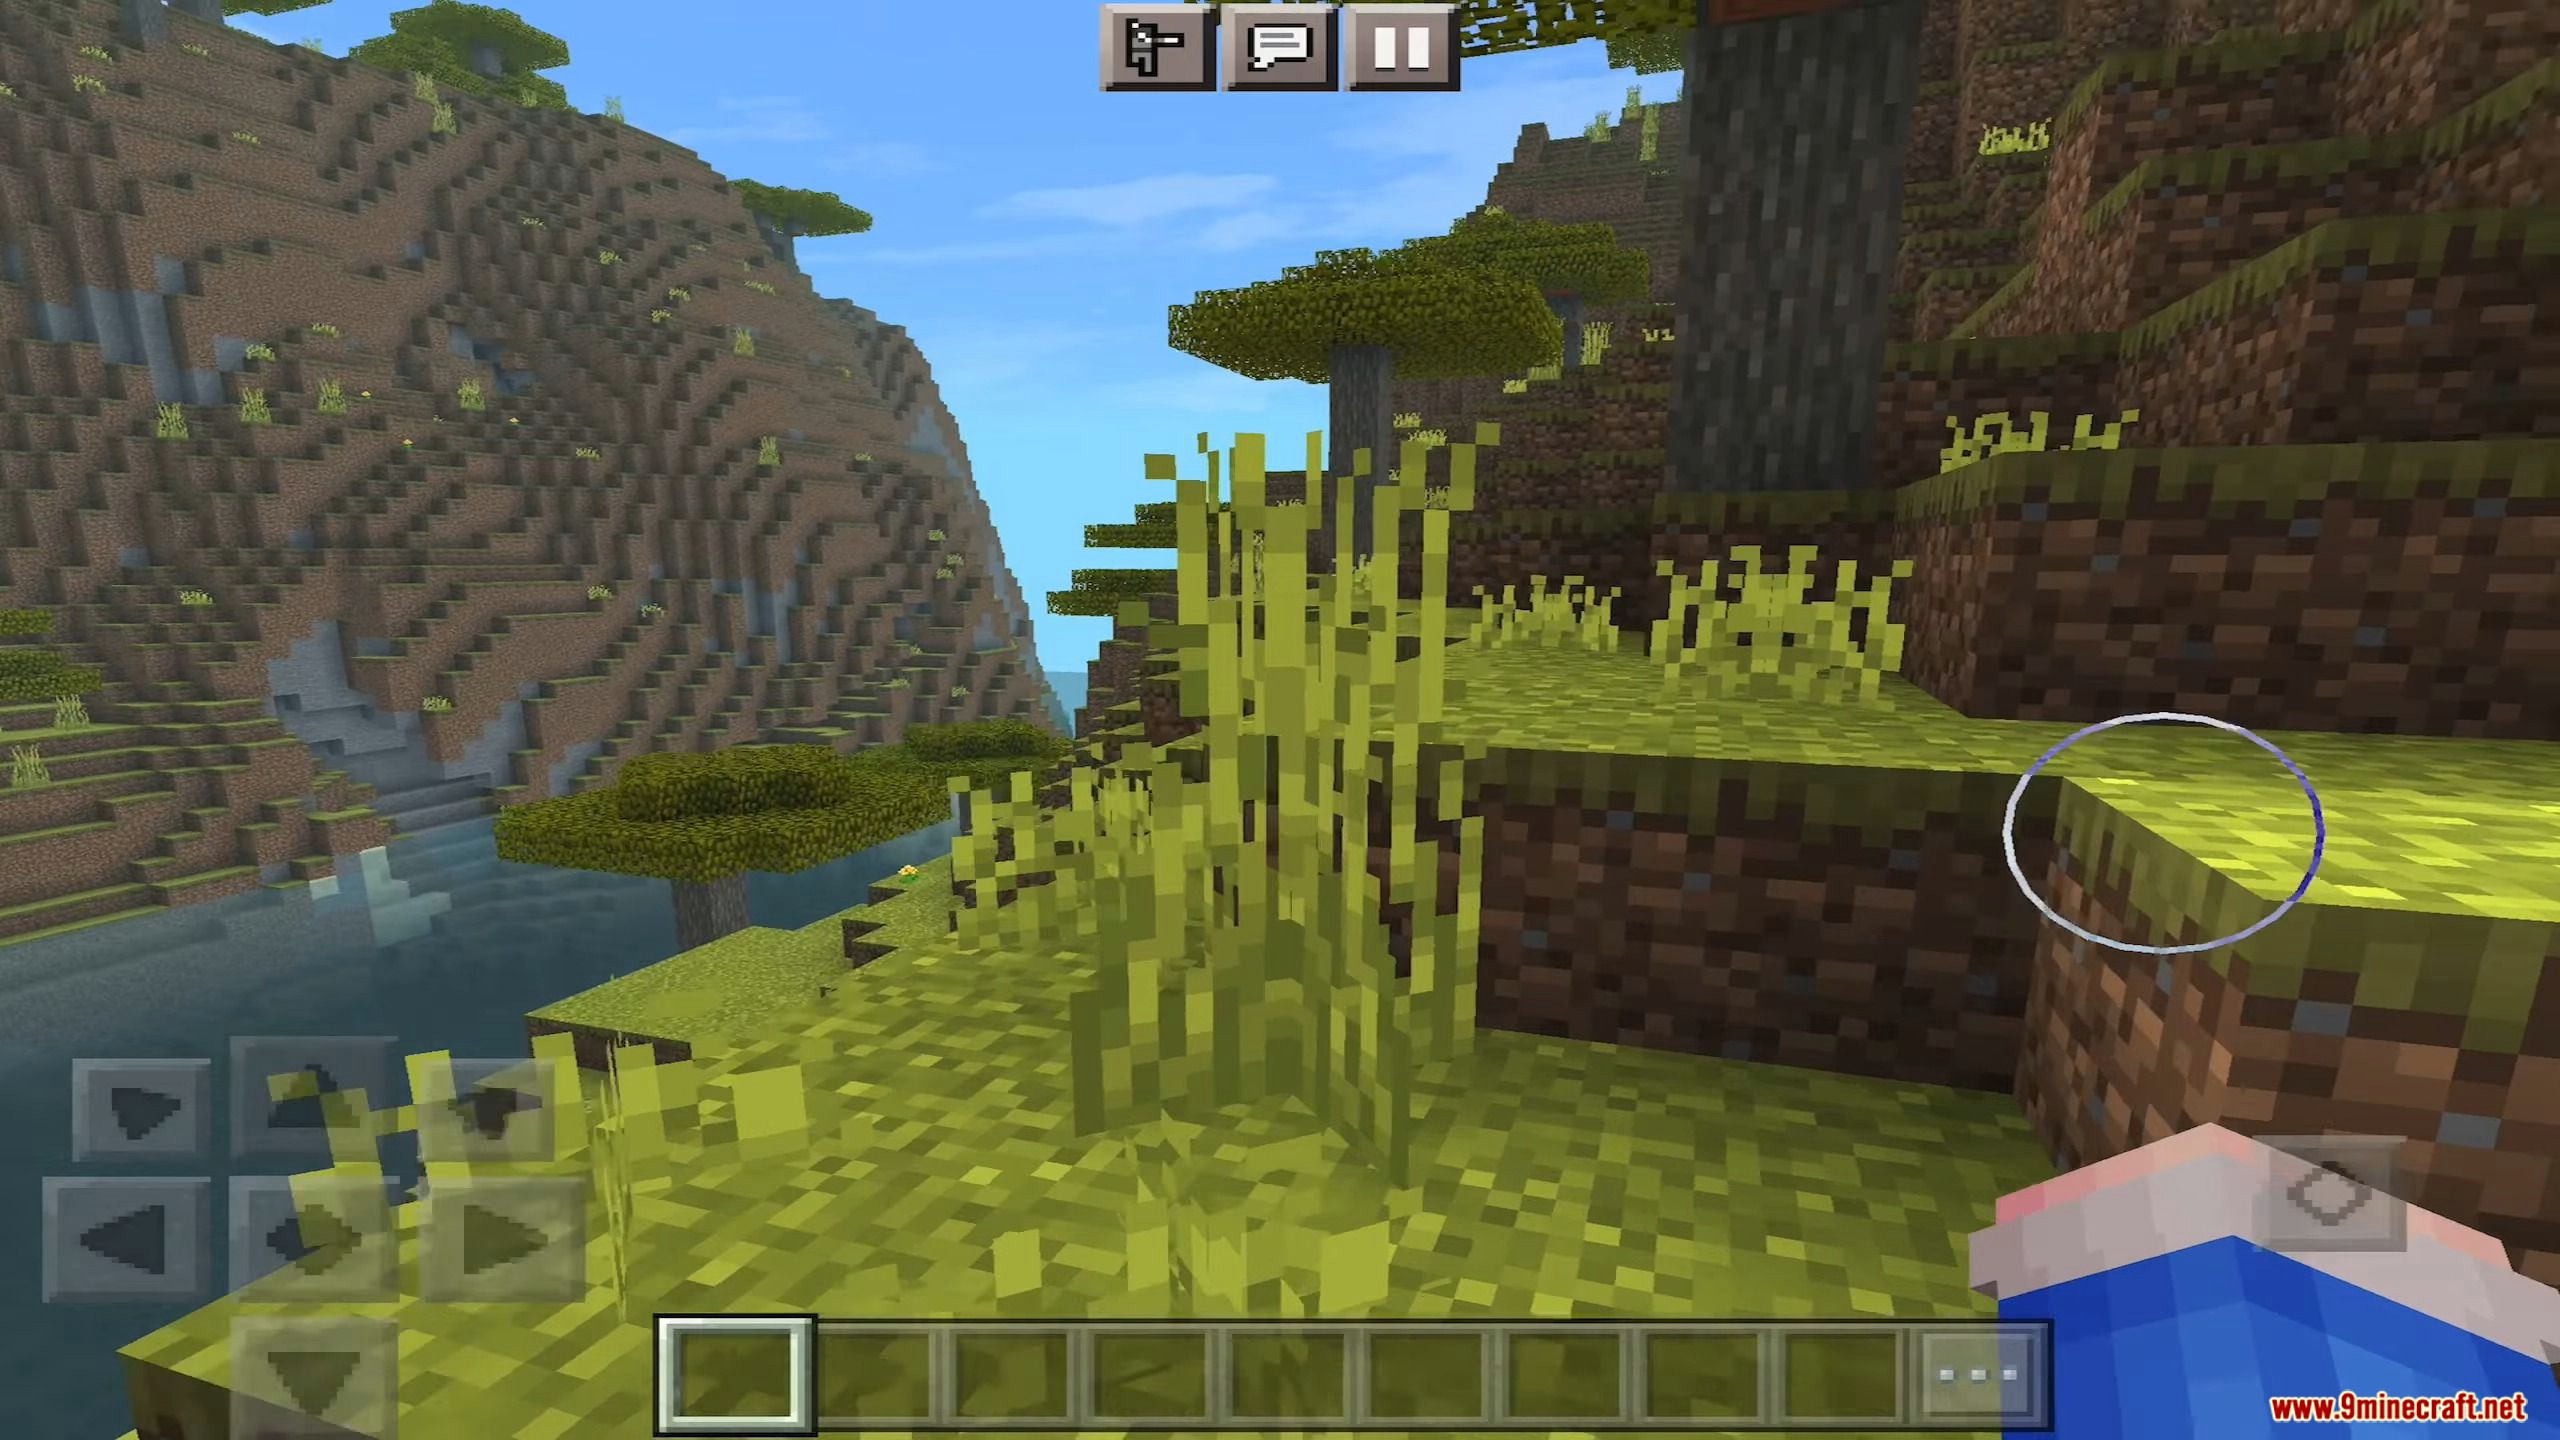 BGRD Shaders (1.19, 1.18) - No Lag Support Render Dragon 4